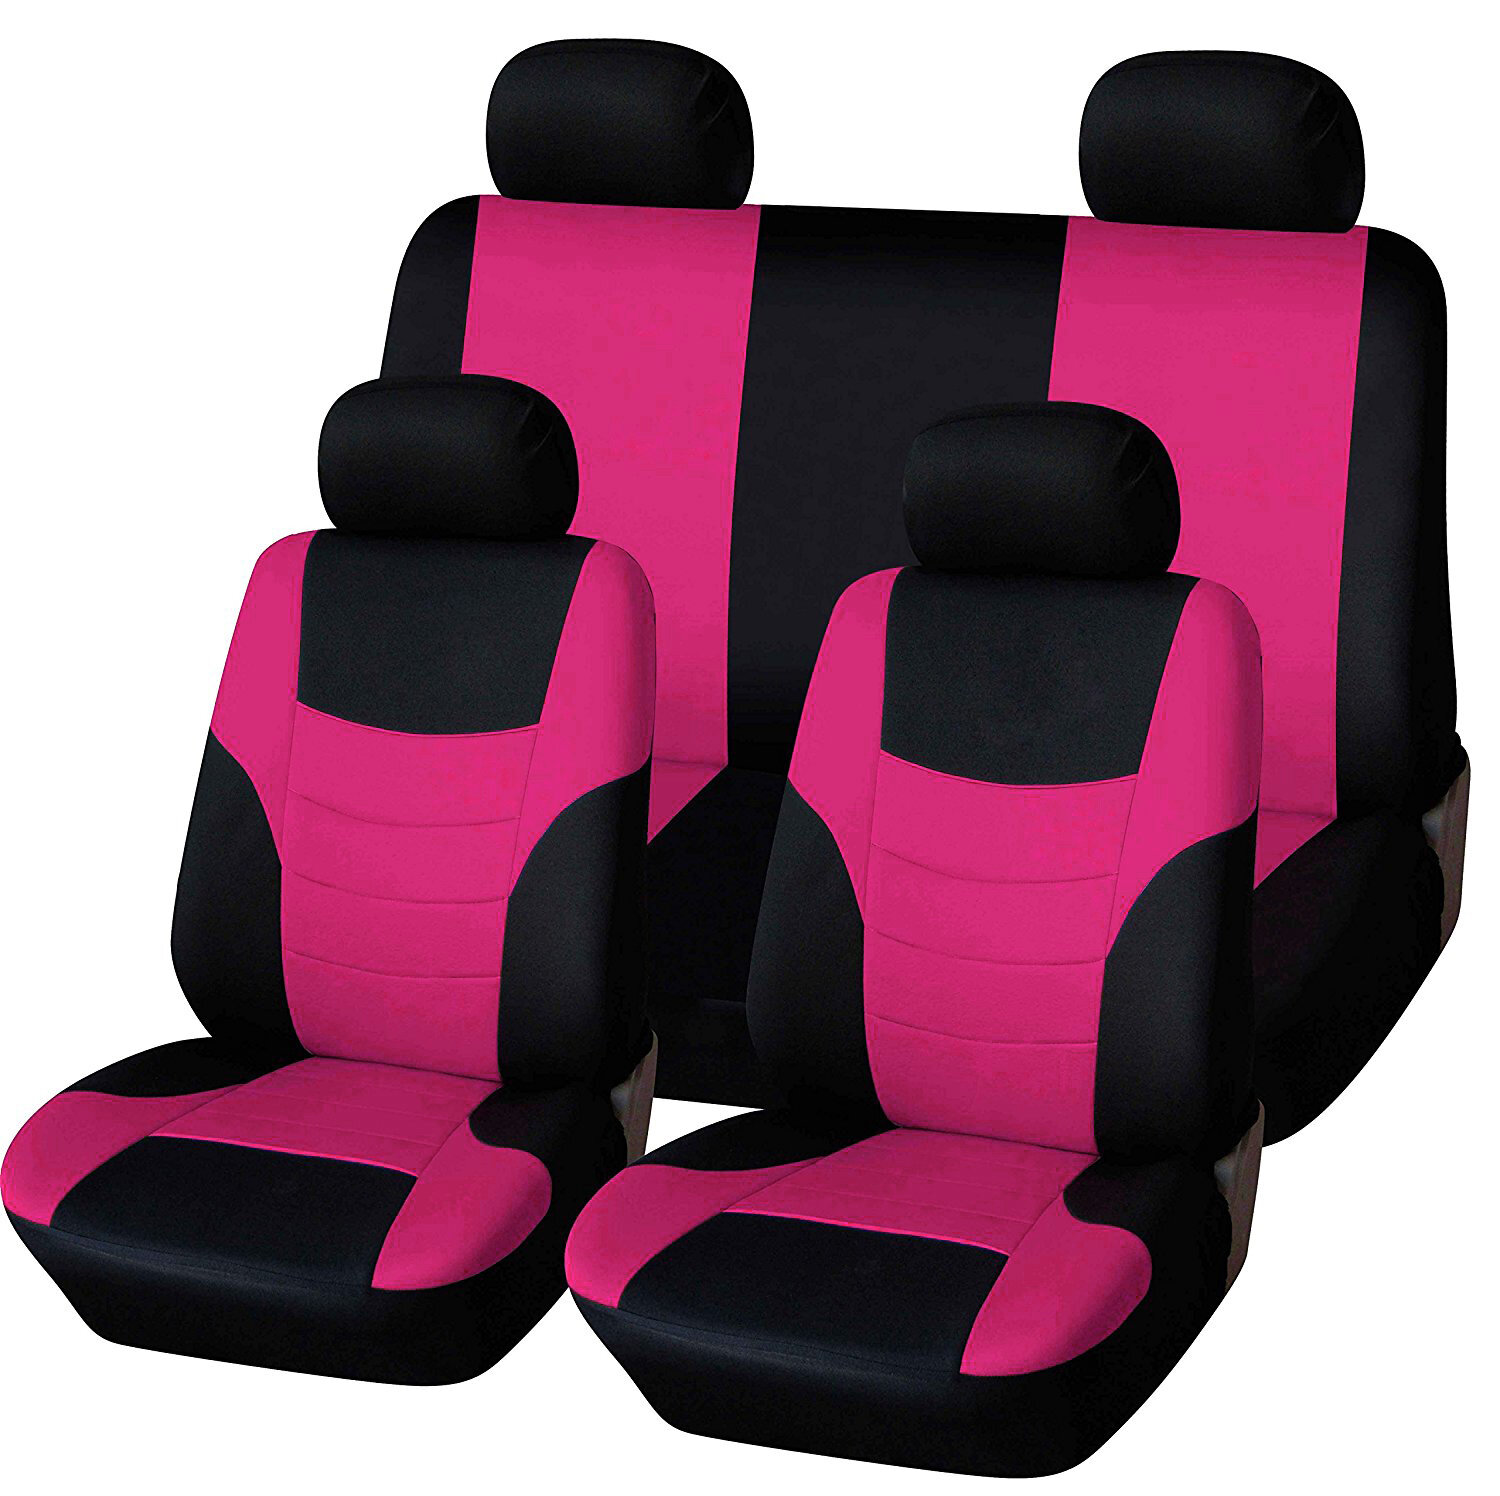 8pcs polyester fabric car full seat cover cushion protector set front